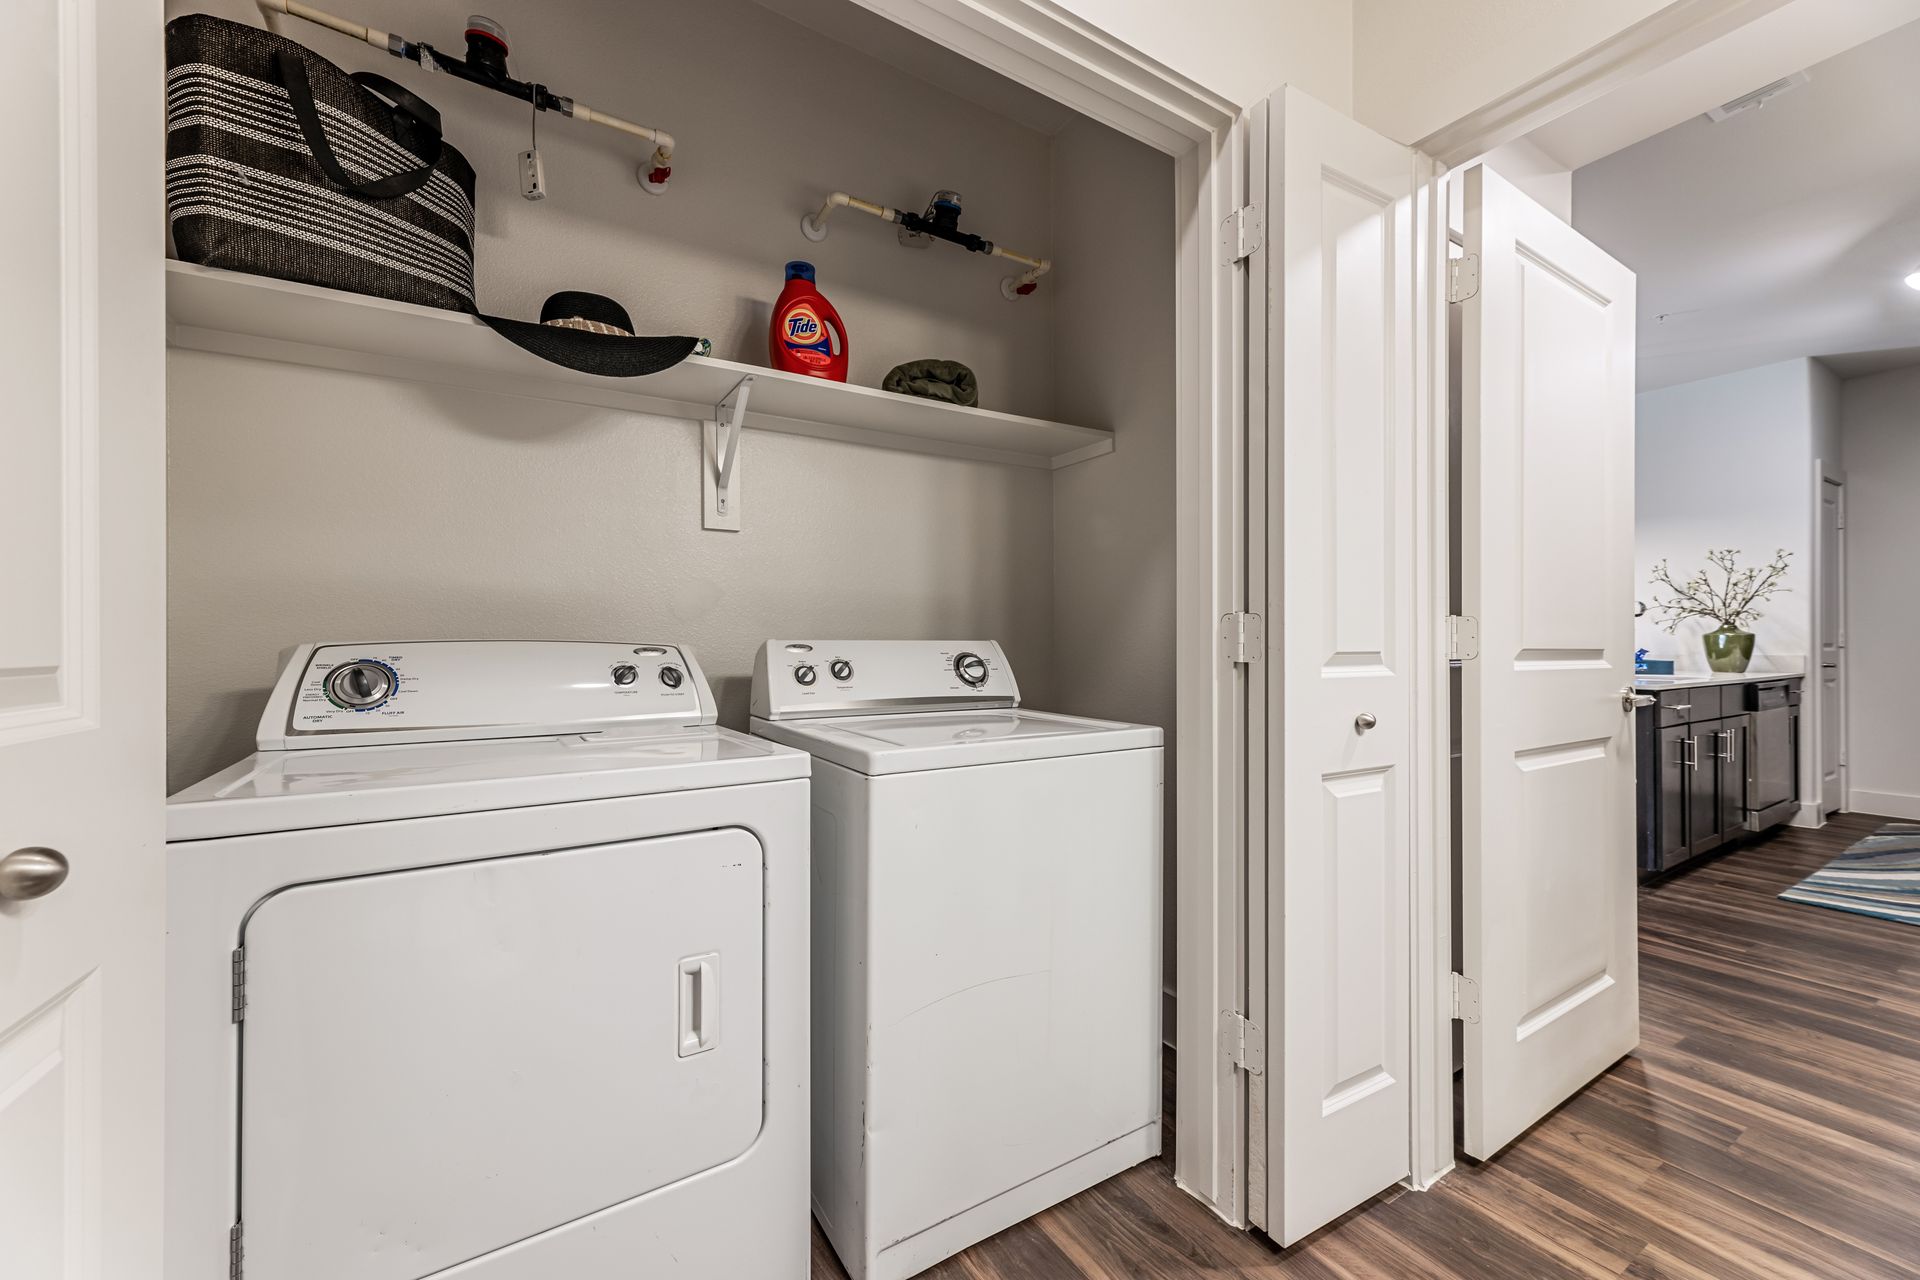 A laundry room with a washer and dryer in a closet.